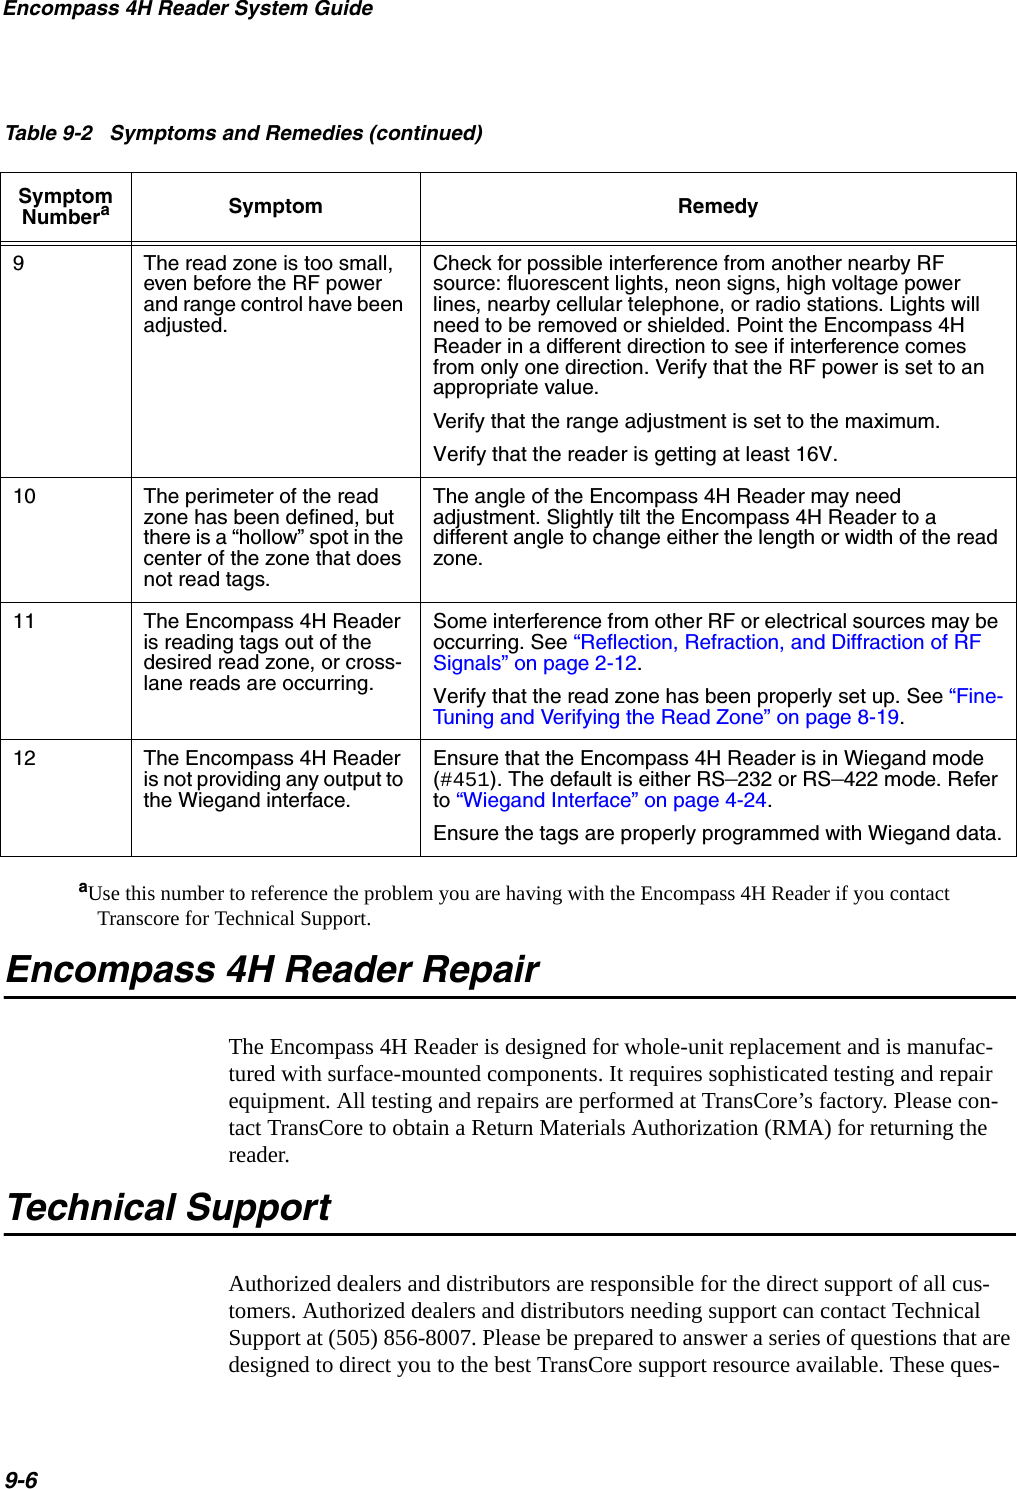 Encompass 4H Reader System Guide9-6aUse this number to reference the problem you are having with the Encompass 4H Reader if you contact Transcore for Technical Support. Encompass 4H Reader RepairThe Encompass 4H Reader is designed for whole-unit replacement and is manufac-tured with surface-mounted components. It requires sophisticated testing and repair equipment. All testing and repairs are performed at TransCore’s factory. Please con-tact TransCore to obtain a Return Materials Authorization (RMA) for returning the reader.Technical SupportAuthorized dealers and distributors are responsible for the direct support of all cus-tomers. Authorized dealers and distributors needing support can contact Technical Support at (505) 856-8007. Please be prepared to answer a series of questions that are designed to direct you to the best TransCore support resource available. These ques-9The read zone is too small, even before the RF power and range control have been adjusted.Check for possible interference from another nearby RF source: fluorescent lights, neon signs, high voltage power lines, nearby cellular telephone, or radio stations. Lights will need to be removed or shielded. Point the Encompass 4H Reader in a different direction to see if interference comes from only one direction. Verify that the RF power is set to an appropriate value.Verify that the range adjustment is set to the maximum.Verify that the reader is getting at least 16V. 10 The perimeter of the read zone has been defined, but there is a “hollow” spot in the center of the zone that does not read tags.The angle of the Encompass 4H Reader may need adjustment. Slightly tilt the Encompass 4H Reader to a different angle to change either the length or width of the read zone.11 The Encompass 4H Reader is reading tags out of the desired read zone, or cross-lane reads are occurring.Some interference from other RF or electrical sources may be occurring. See “Reflection, Refraction, and Diffraction of RF Signals” on page 2-12. Verify that the read zone has been properly set up. See “Fine-Tuning and Verifying the Read Zone” on page 8-19.12 The Encompass 4H Reader is not providing any output to the Wiegand interface.Ensure that the Encompass 4H Reader is in Wiegand mode (#451). The default is either RS–232 or RS–422 mode. Refer to “Wiegand Interface” on page 4-24. Ensure the tags are properly programmed with Wiegand data.Table 9-2   Symptoms and Remedies (continued)Symptom NumberaSymptom Remedy